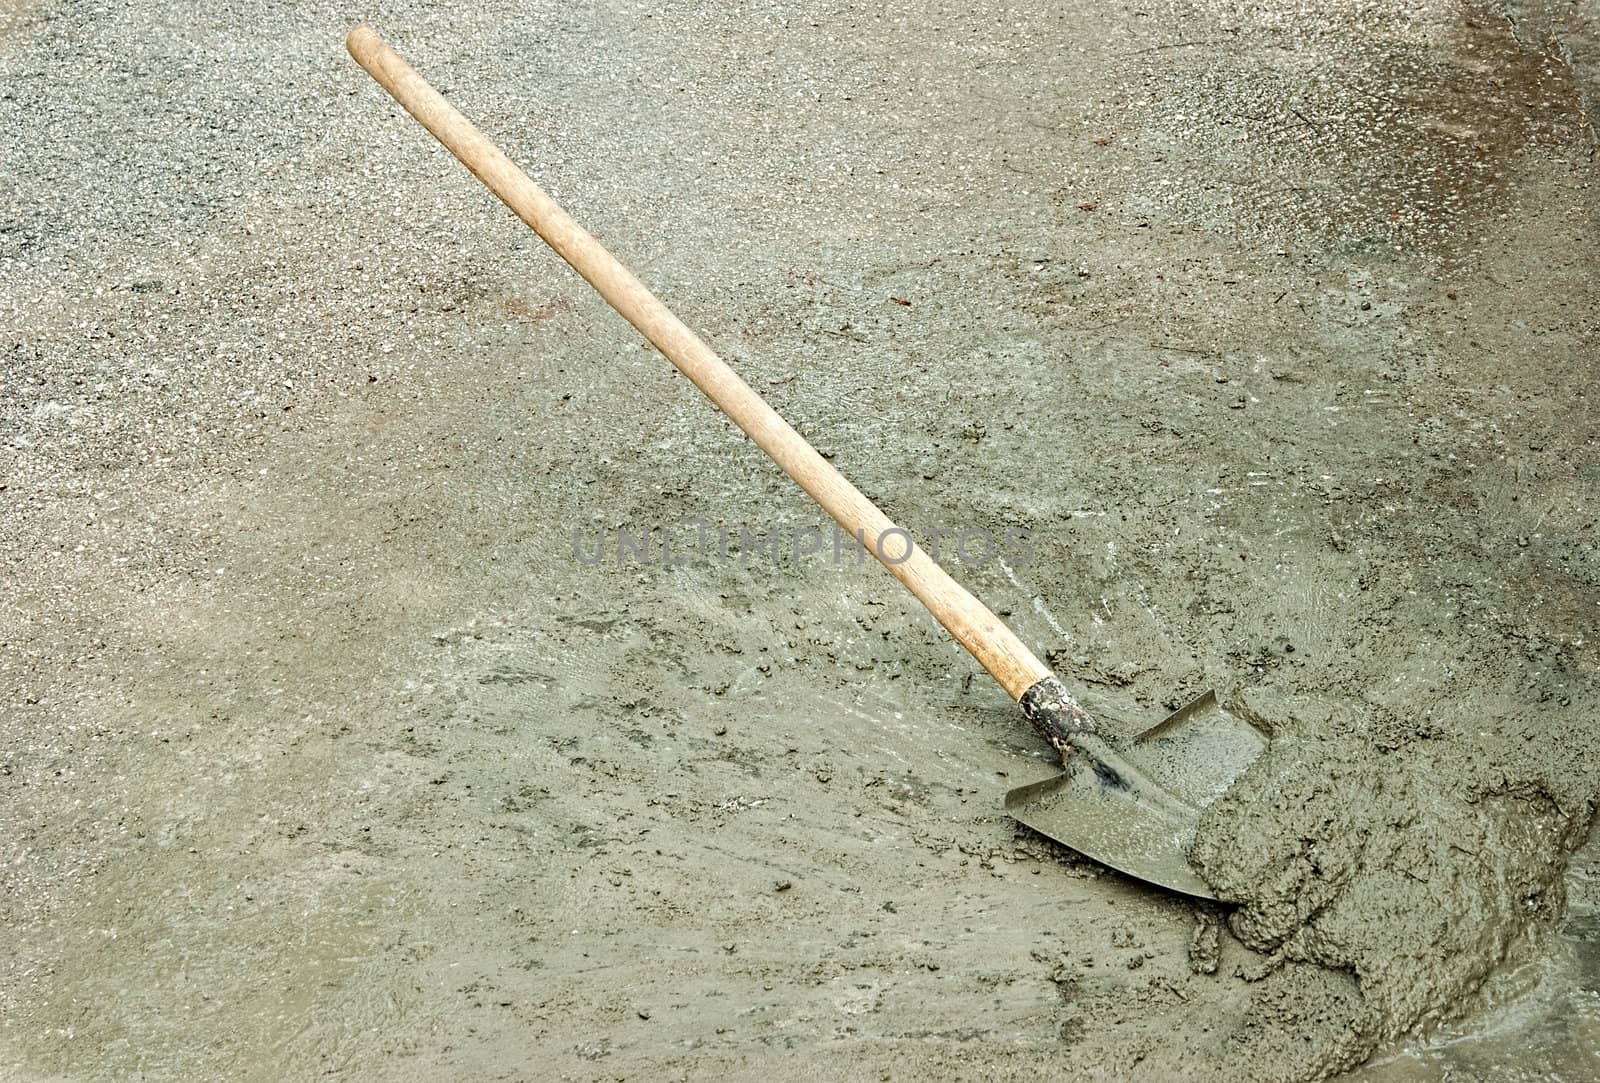 Shovel and wet cement mixture on the road